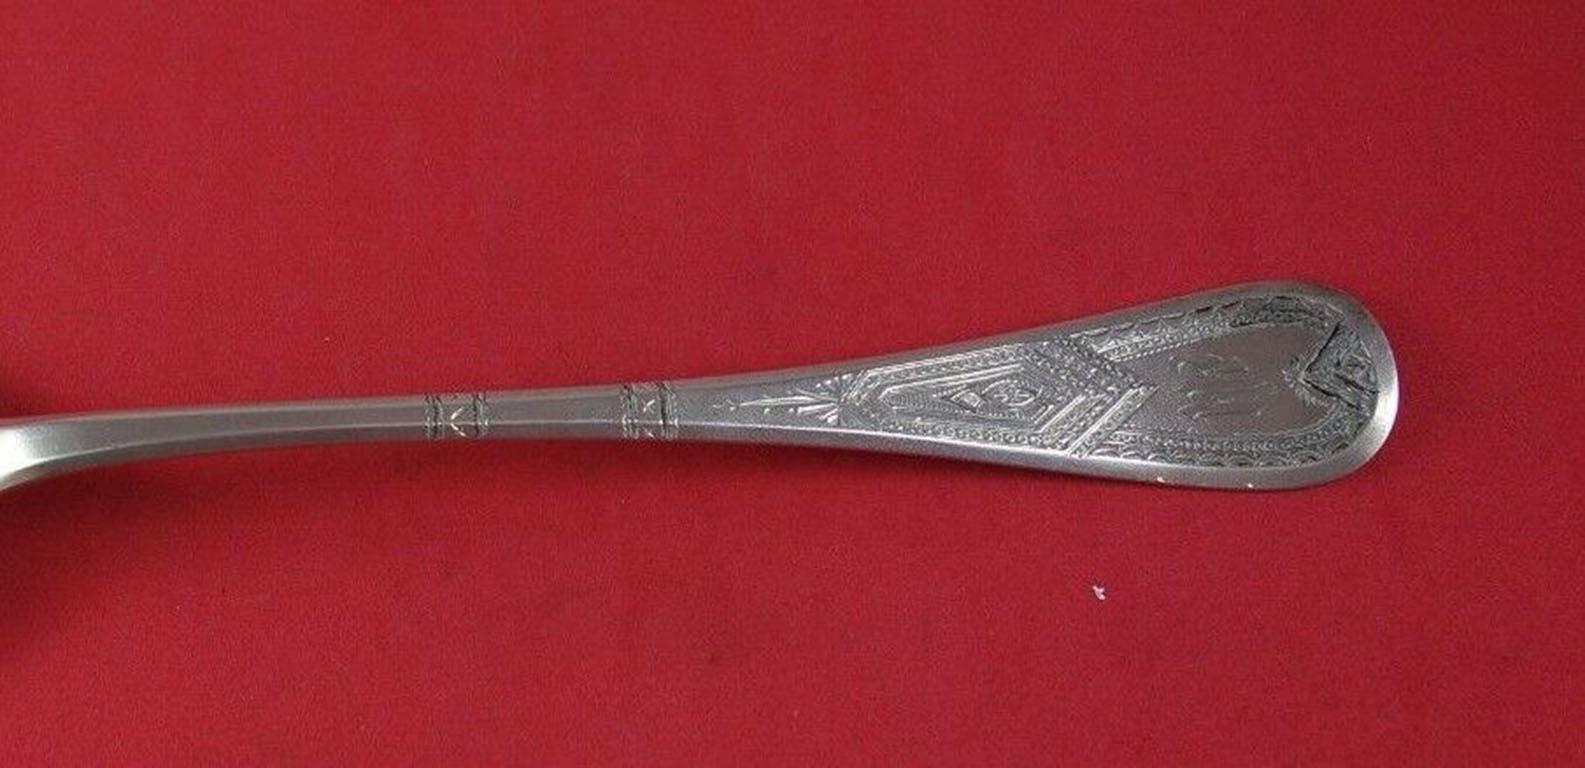 King William engraved by Tiffany & Co. (multi-motif handle pattern) sterling silver salad serving fork stippled, 10 1/2